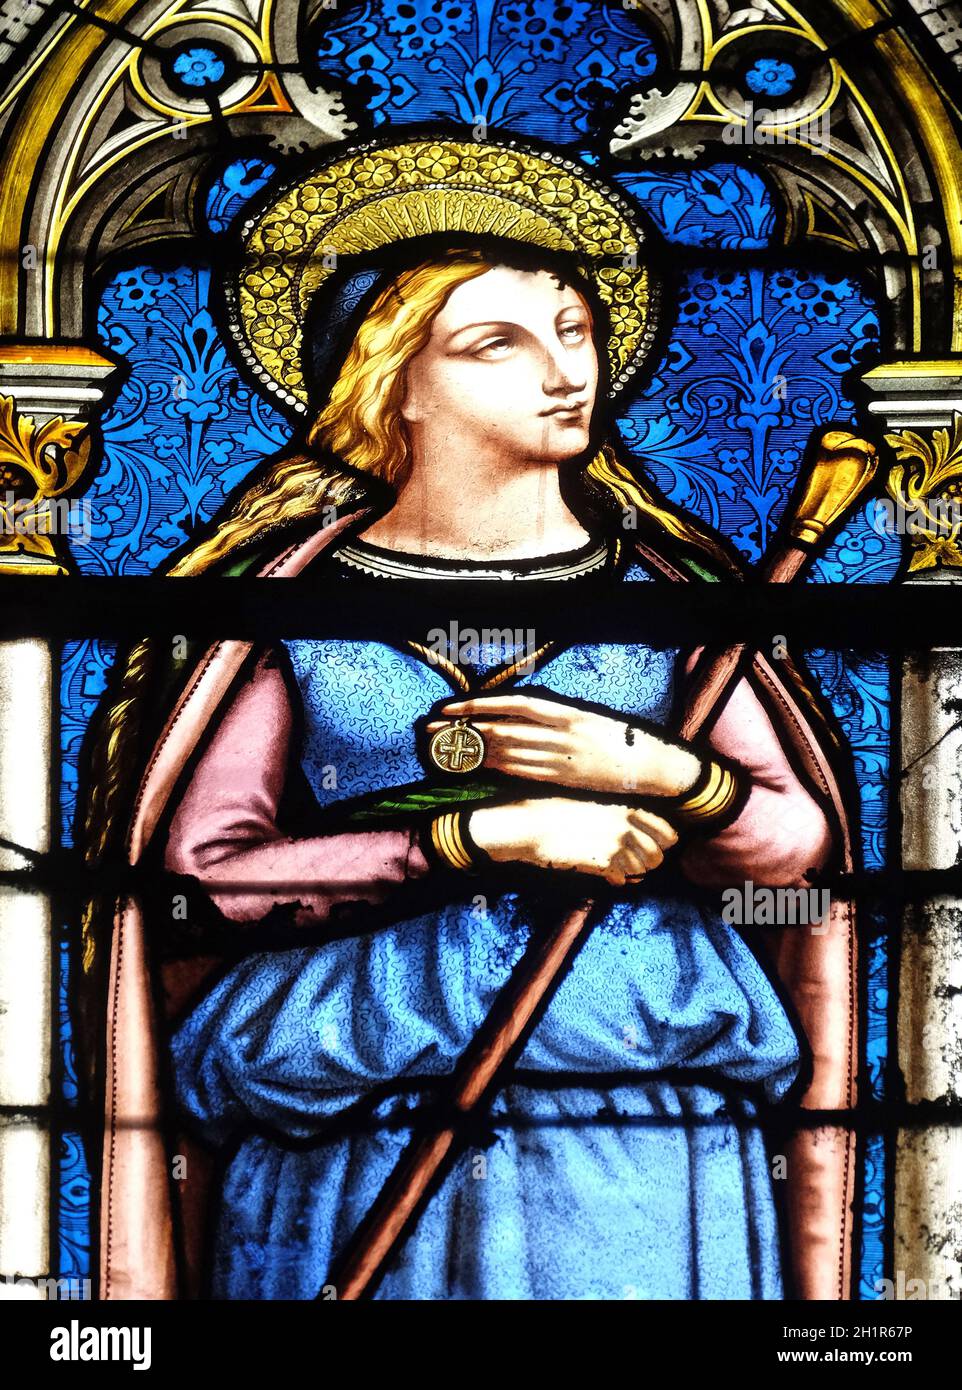 Saint Genevieve, stained glass window in the Basilica of Saint Clotilde in Paris, France Stock Photo